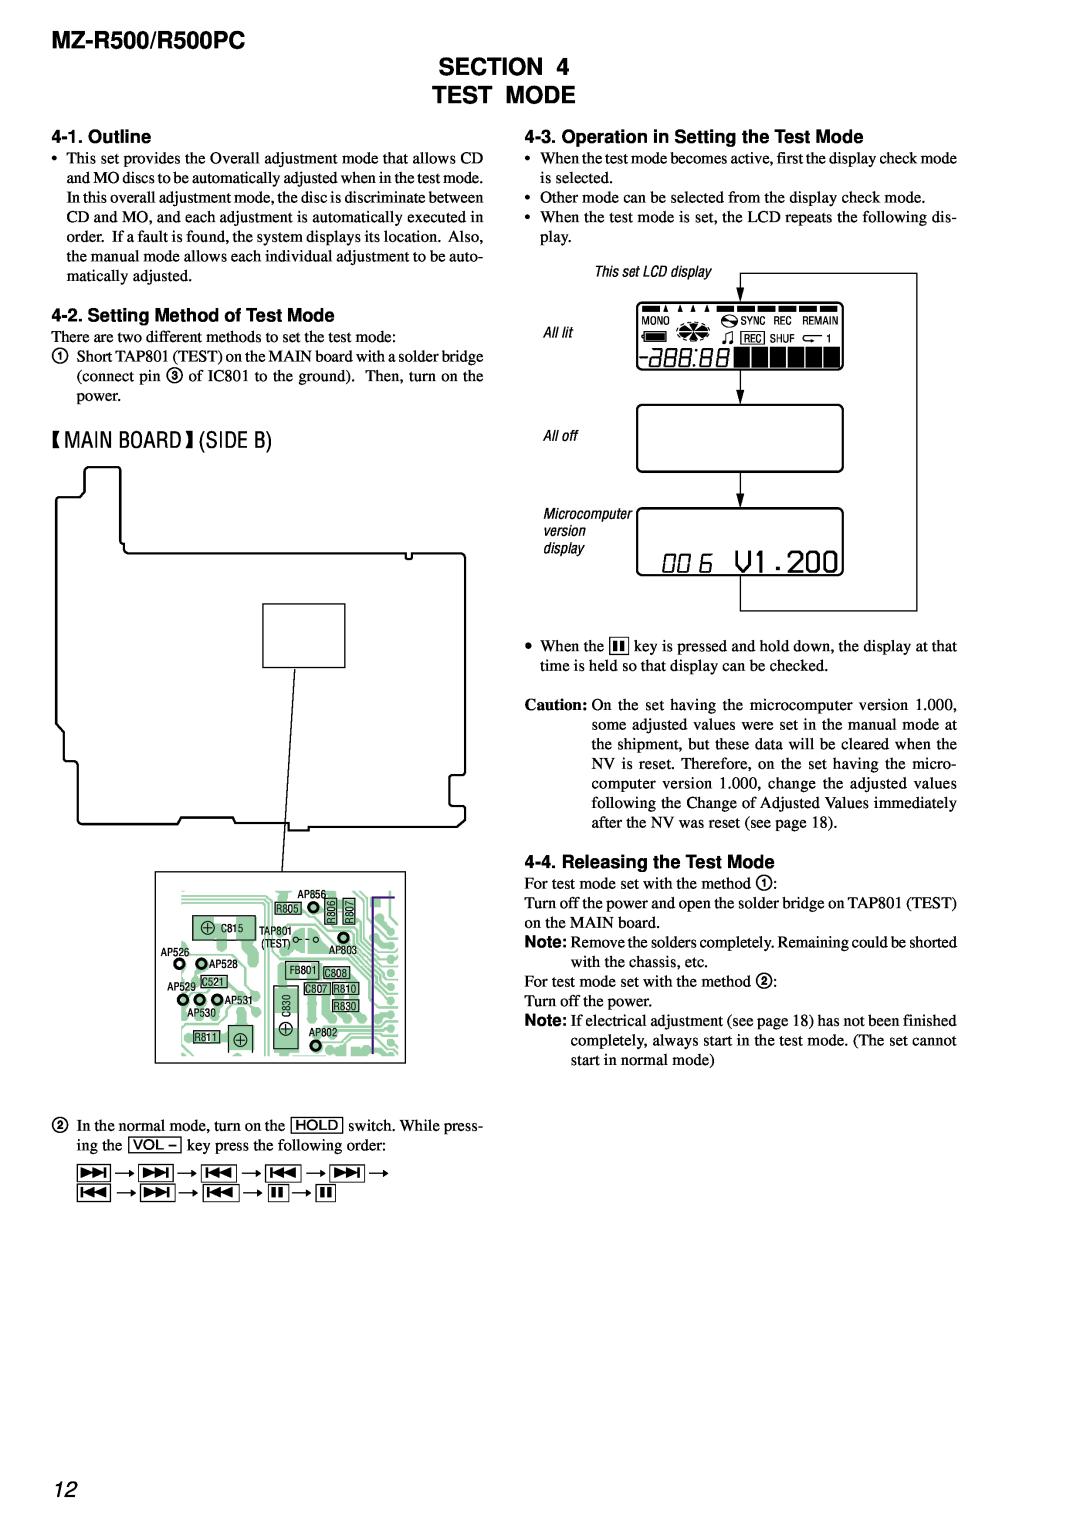 Sony service manual MZ-R500/R500PC SECTION TEST MODE, a88, Main Board Side B, Outline, Setting Method of Test Mode 